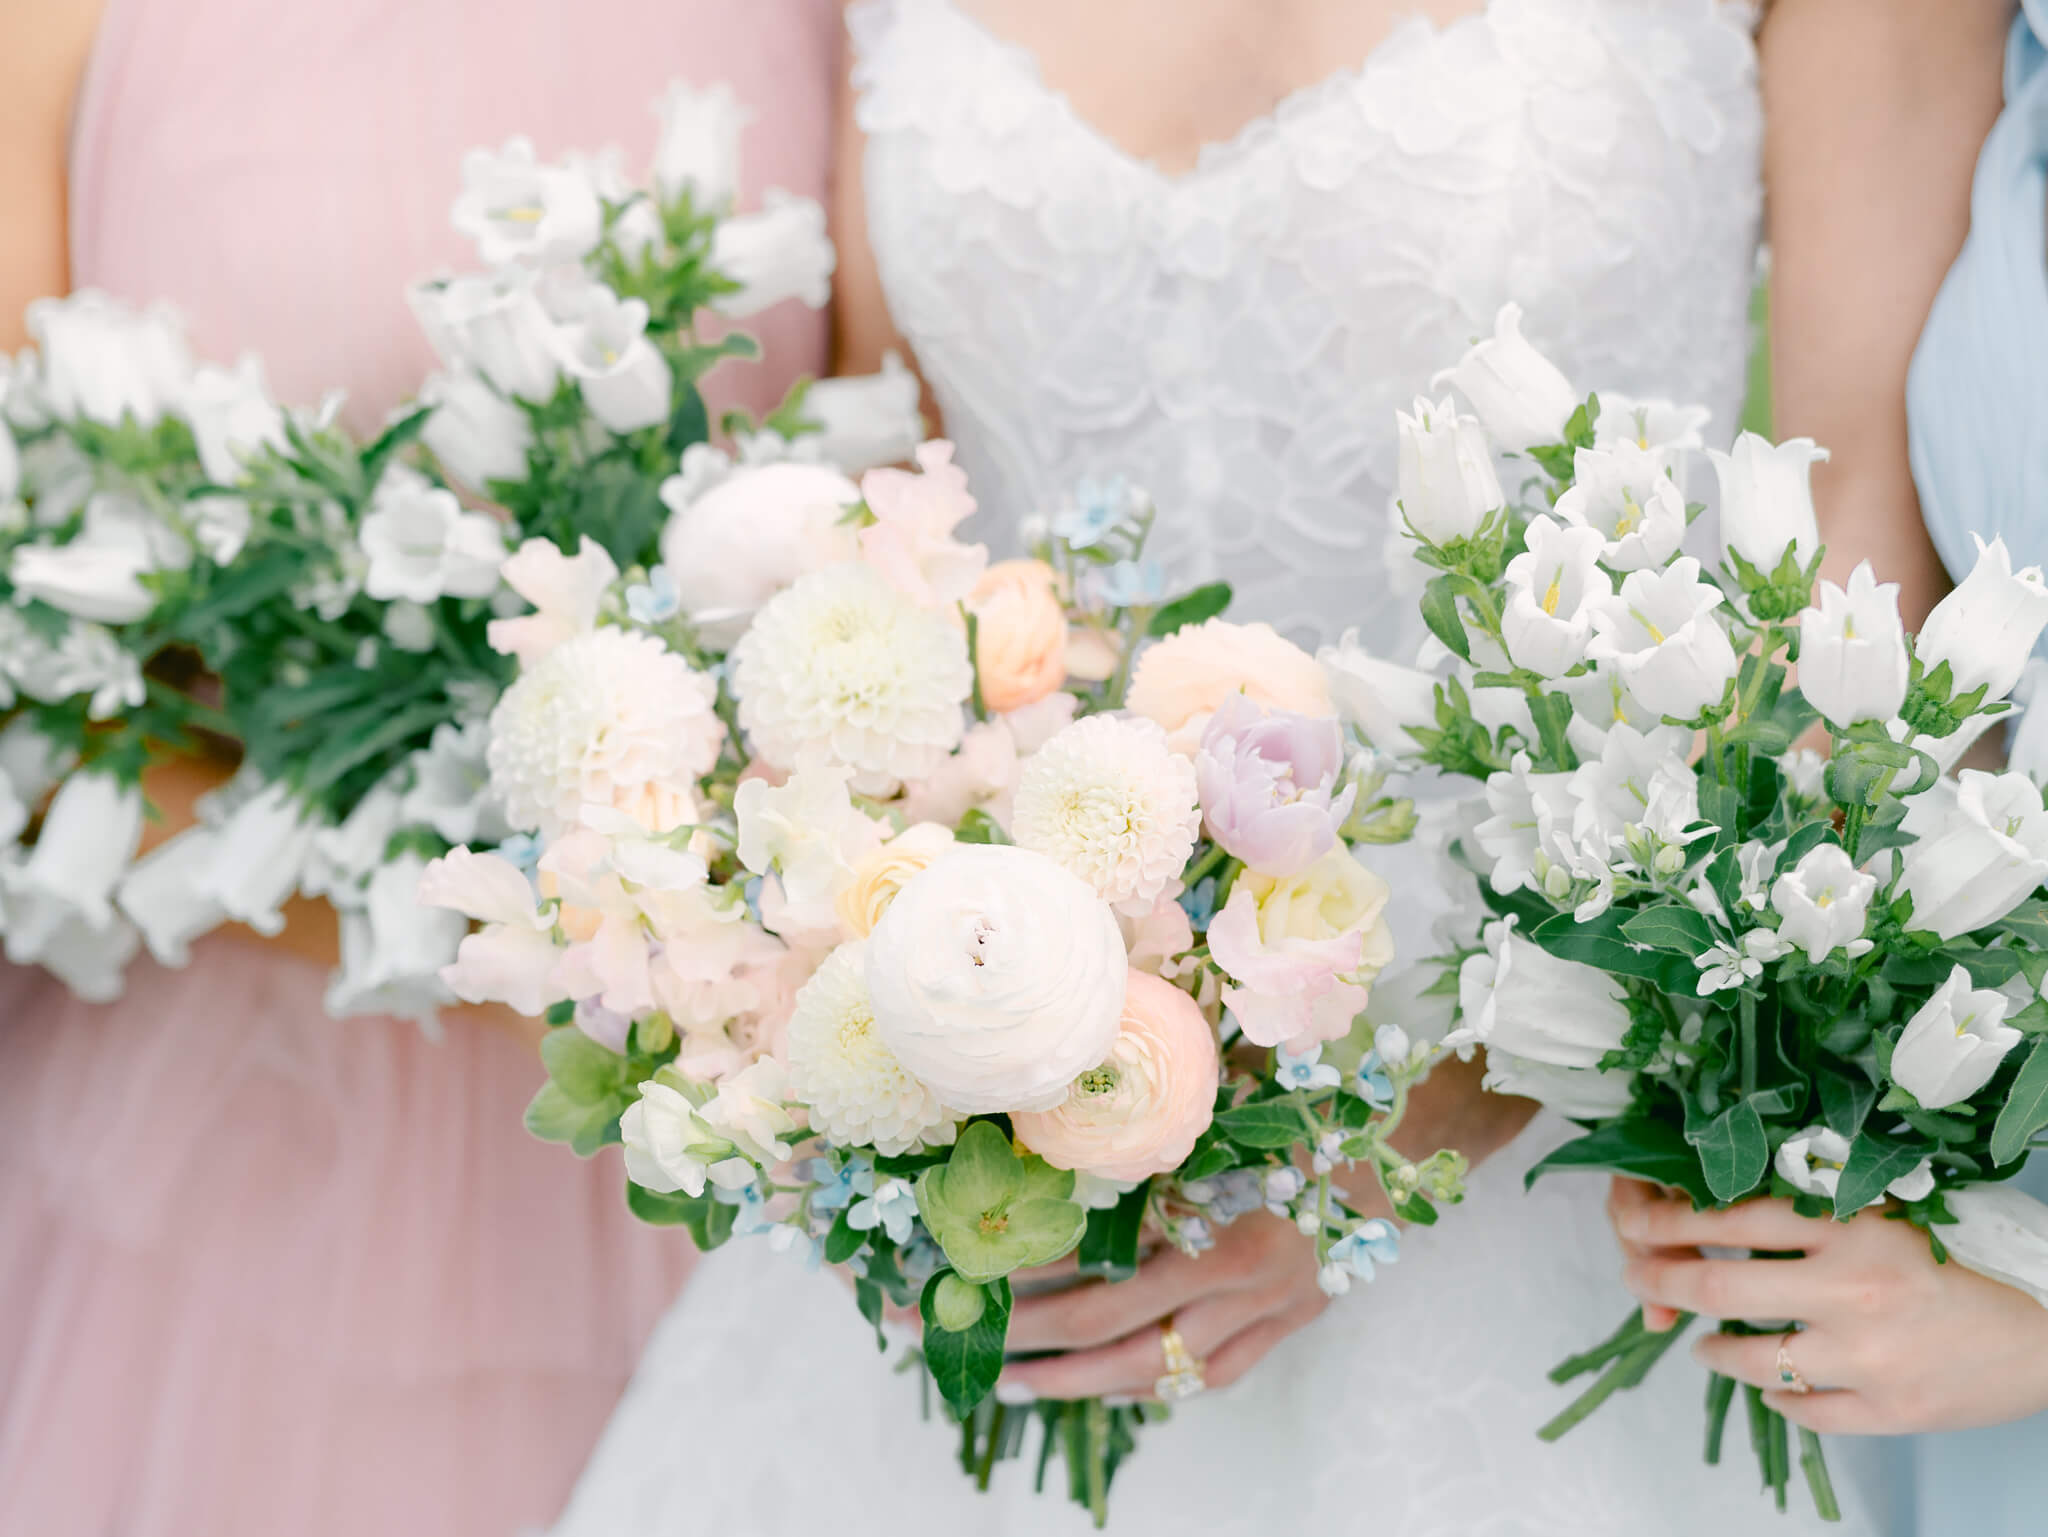 Closeup of the bride's and bridesmaids' pastel bouquets held in front of their white and blush gowns.